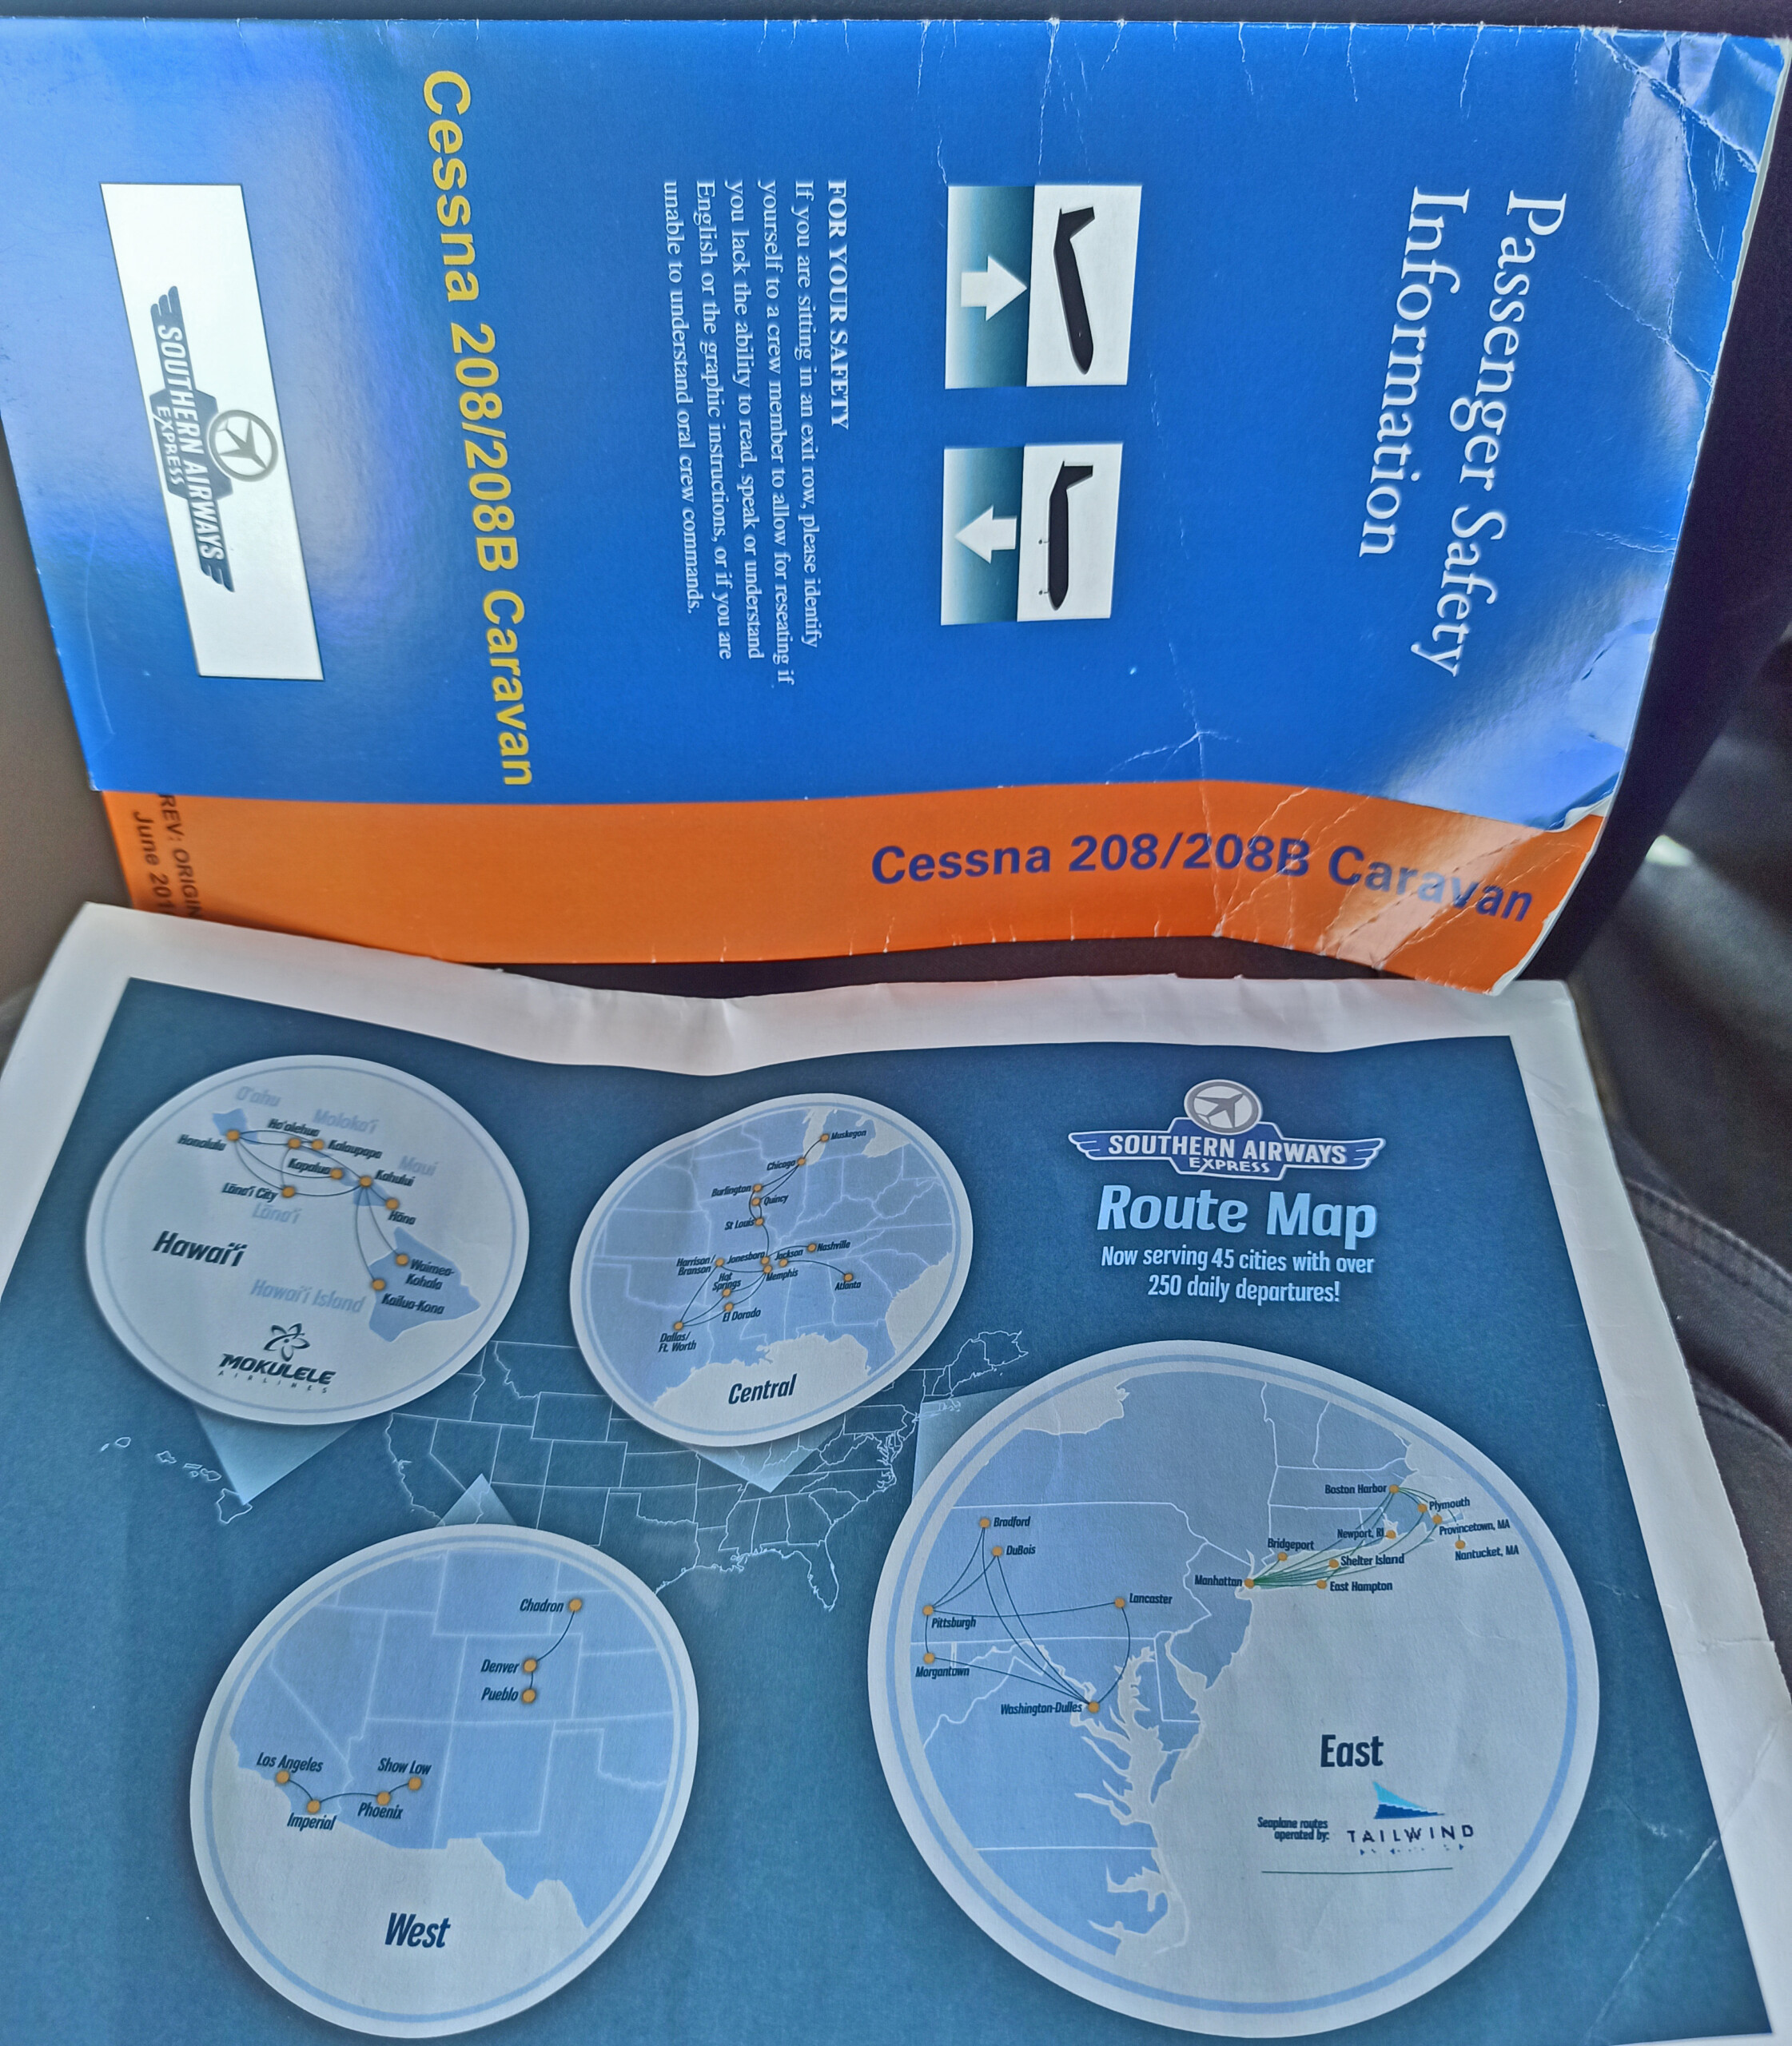 Southern Airways Express route map and safety card